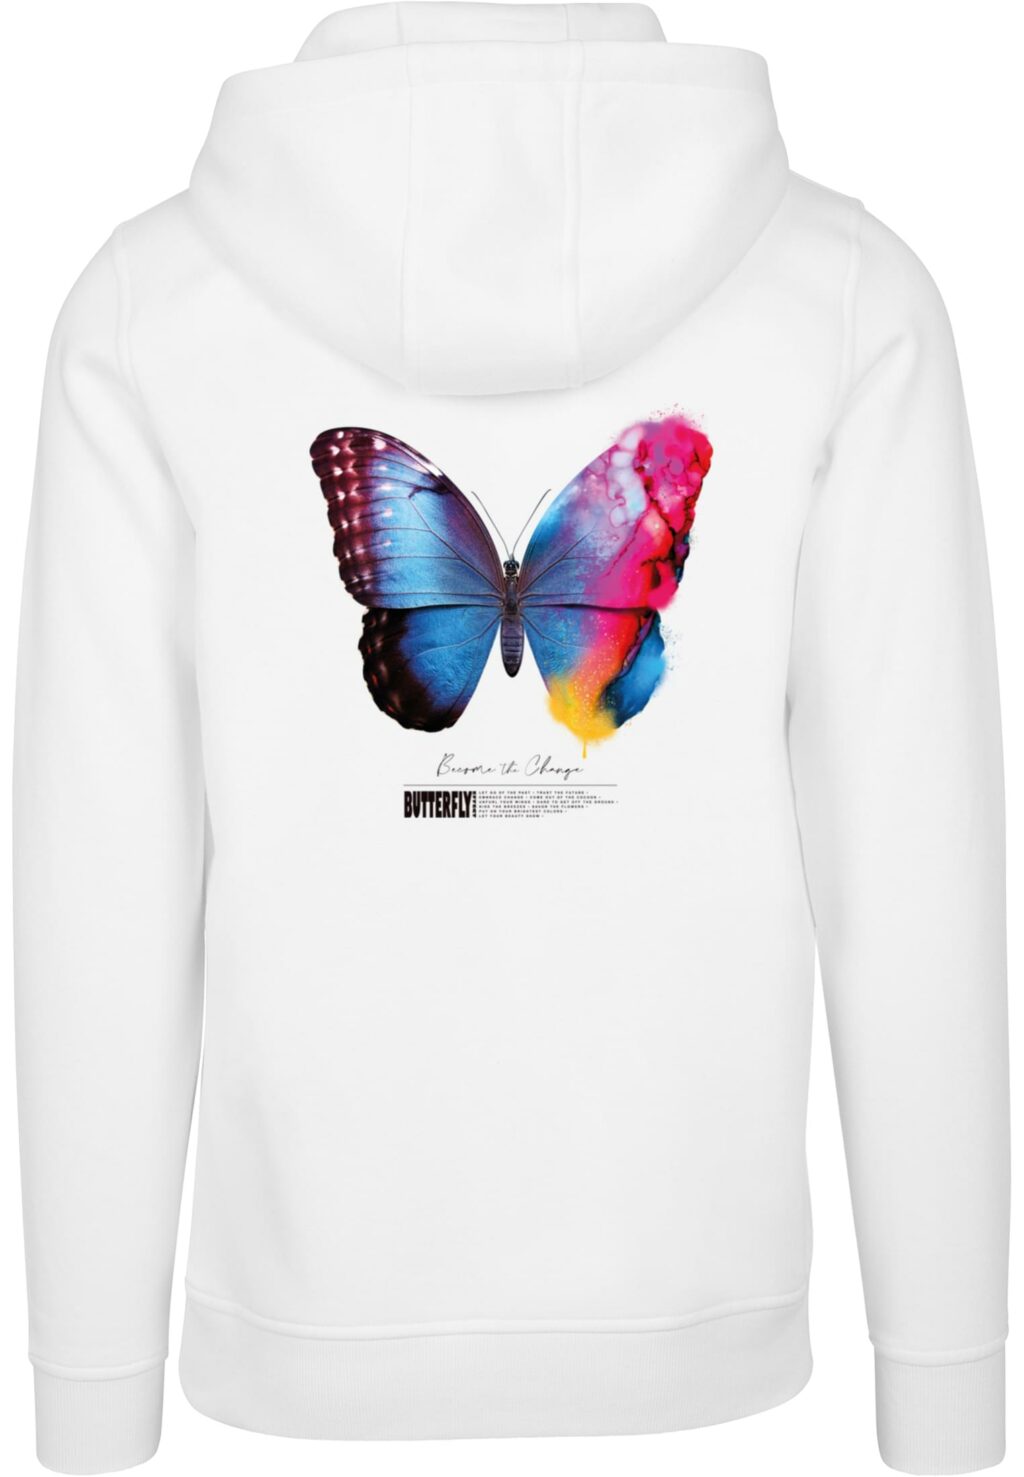 Become the Change Butterfly 2.0 Hoody white MT3027